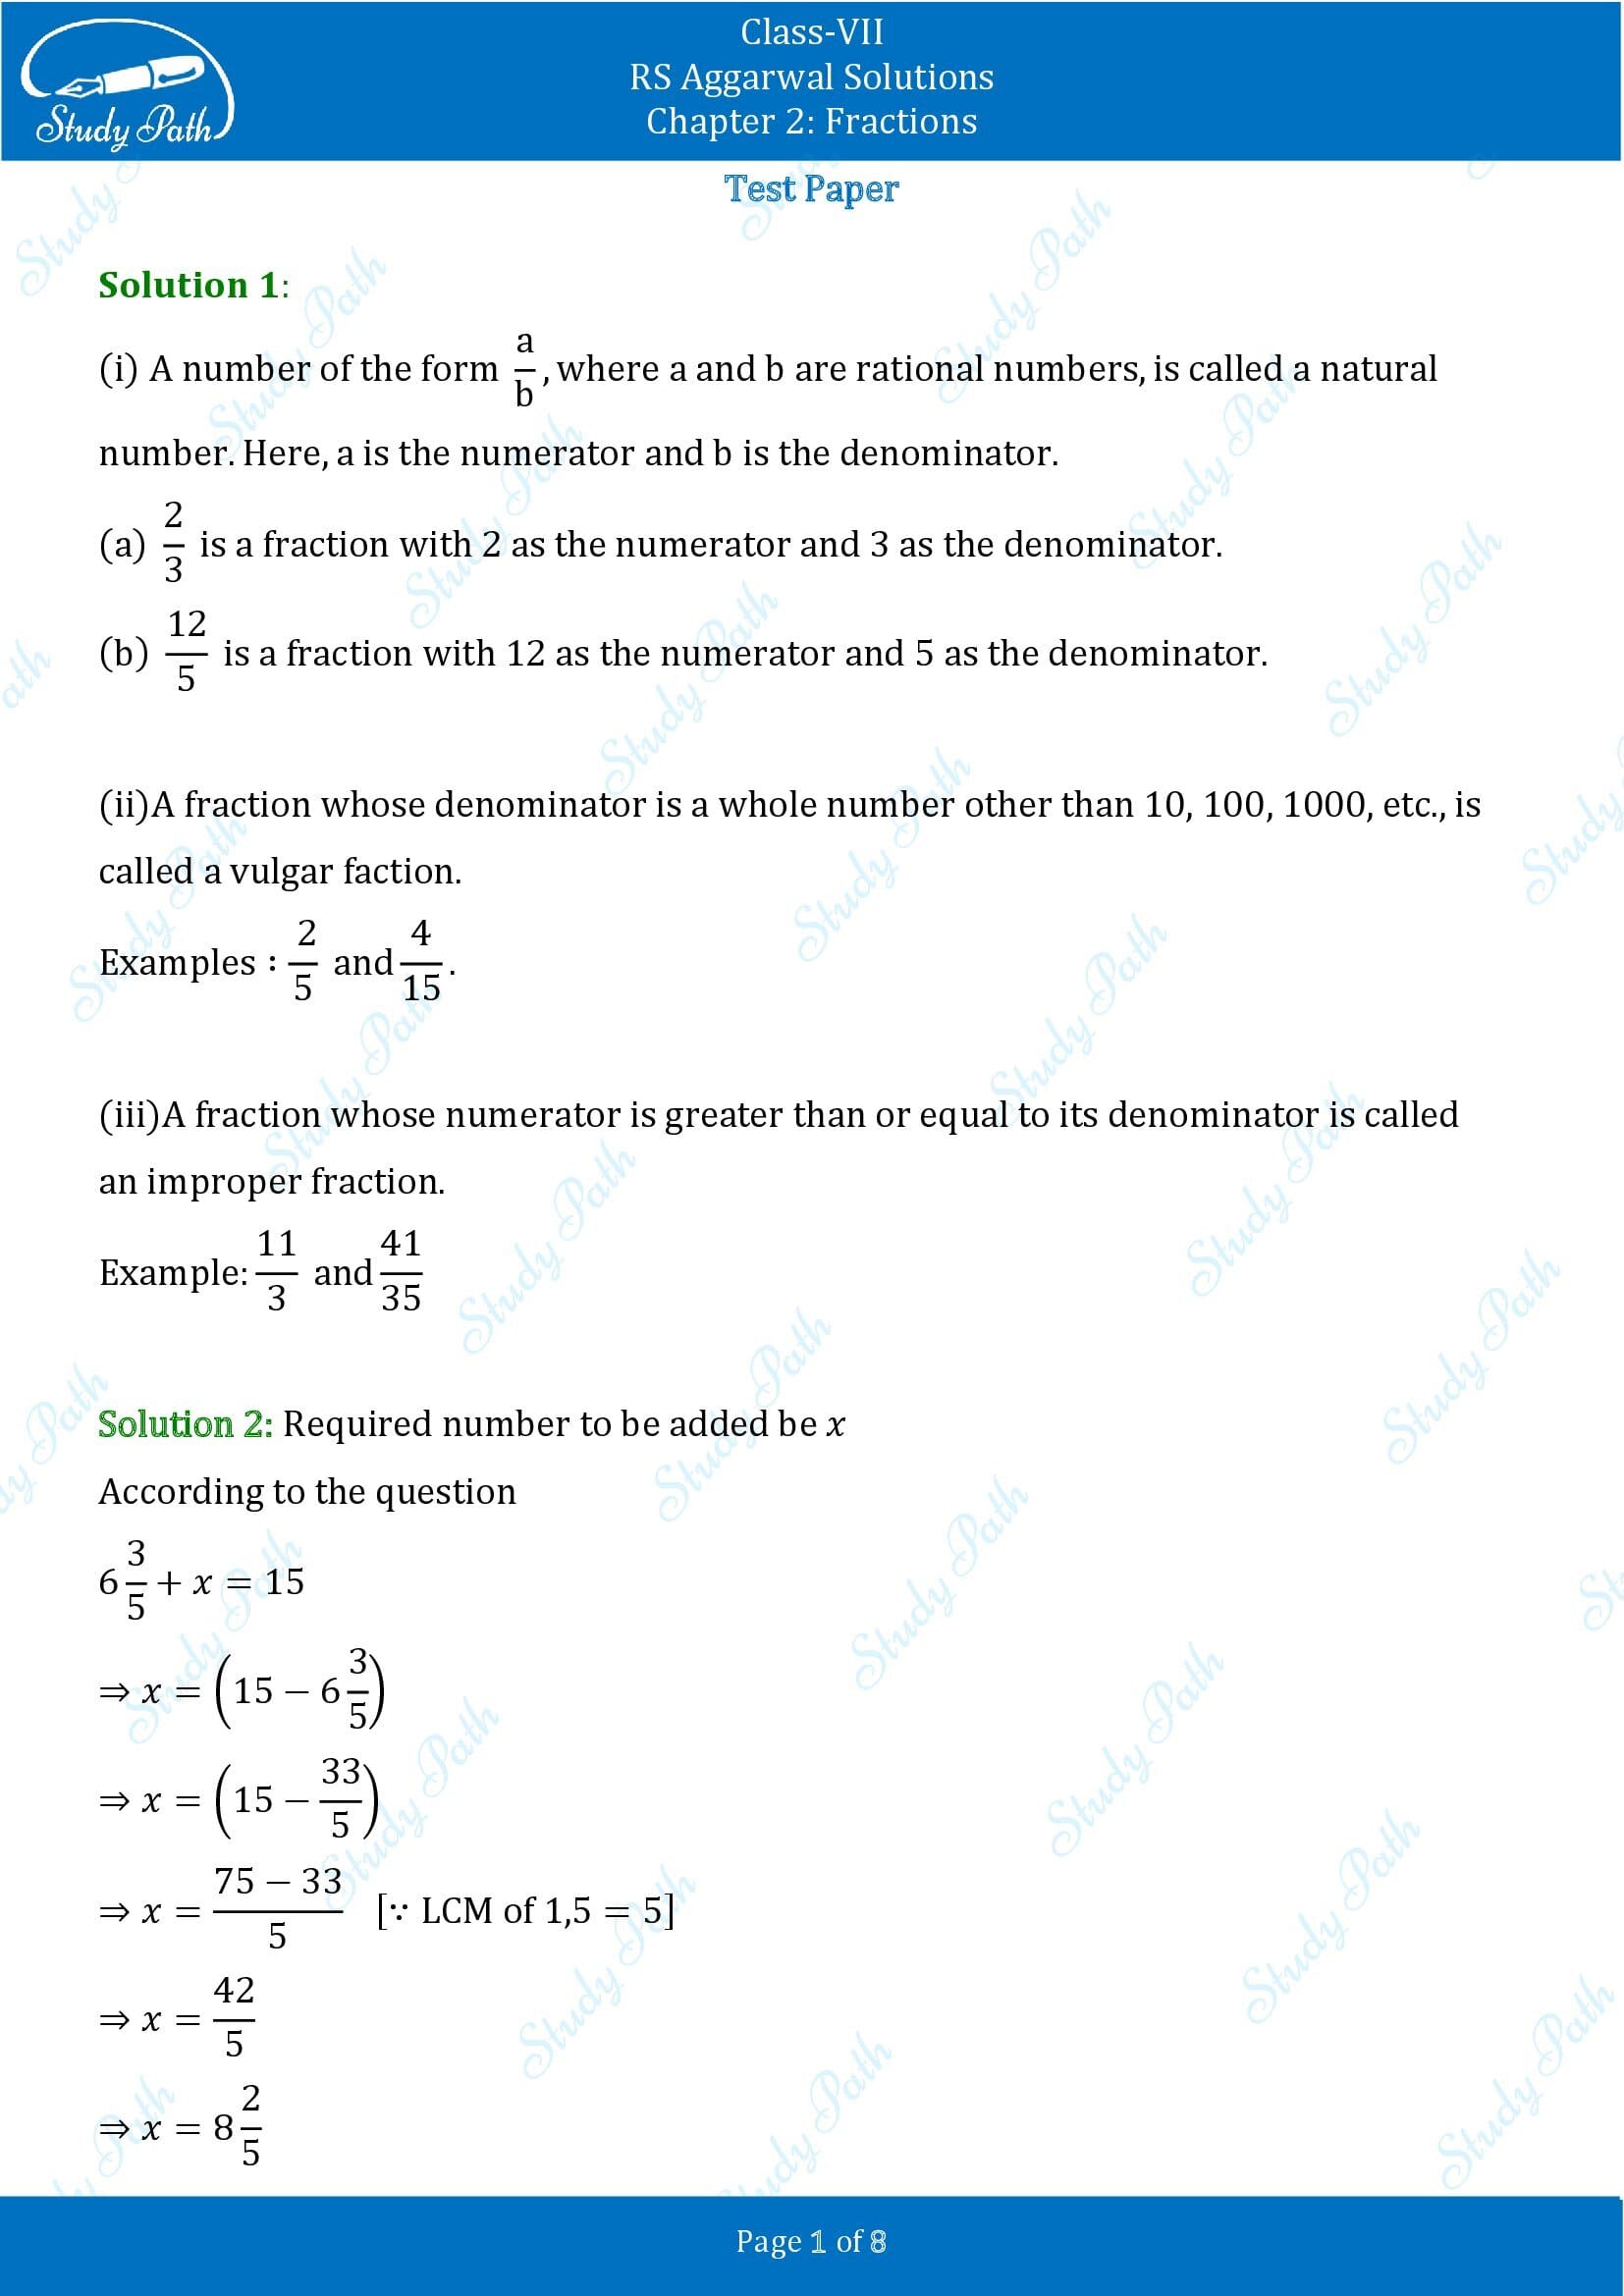 RS Aggarwal Solutions Class 7 Chapter 2 Fractions Test Paper 00001